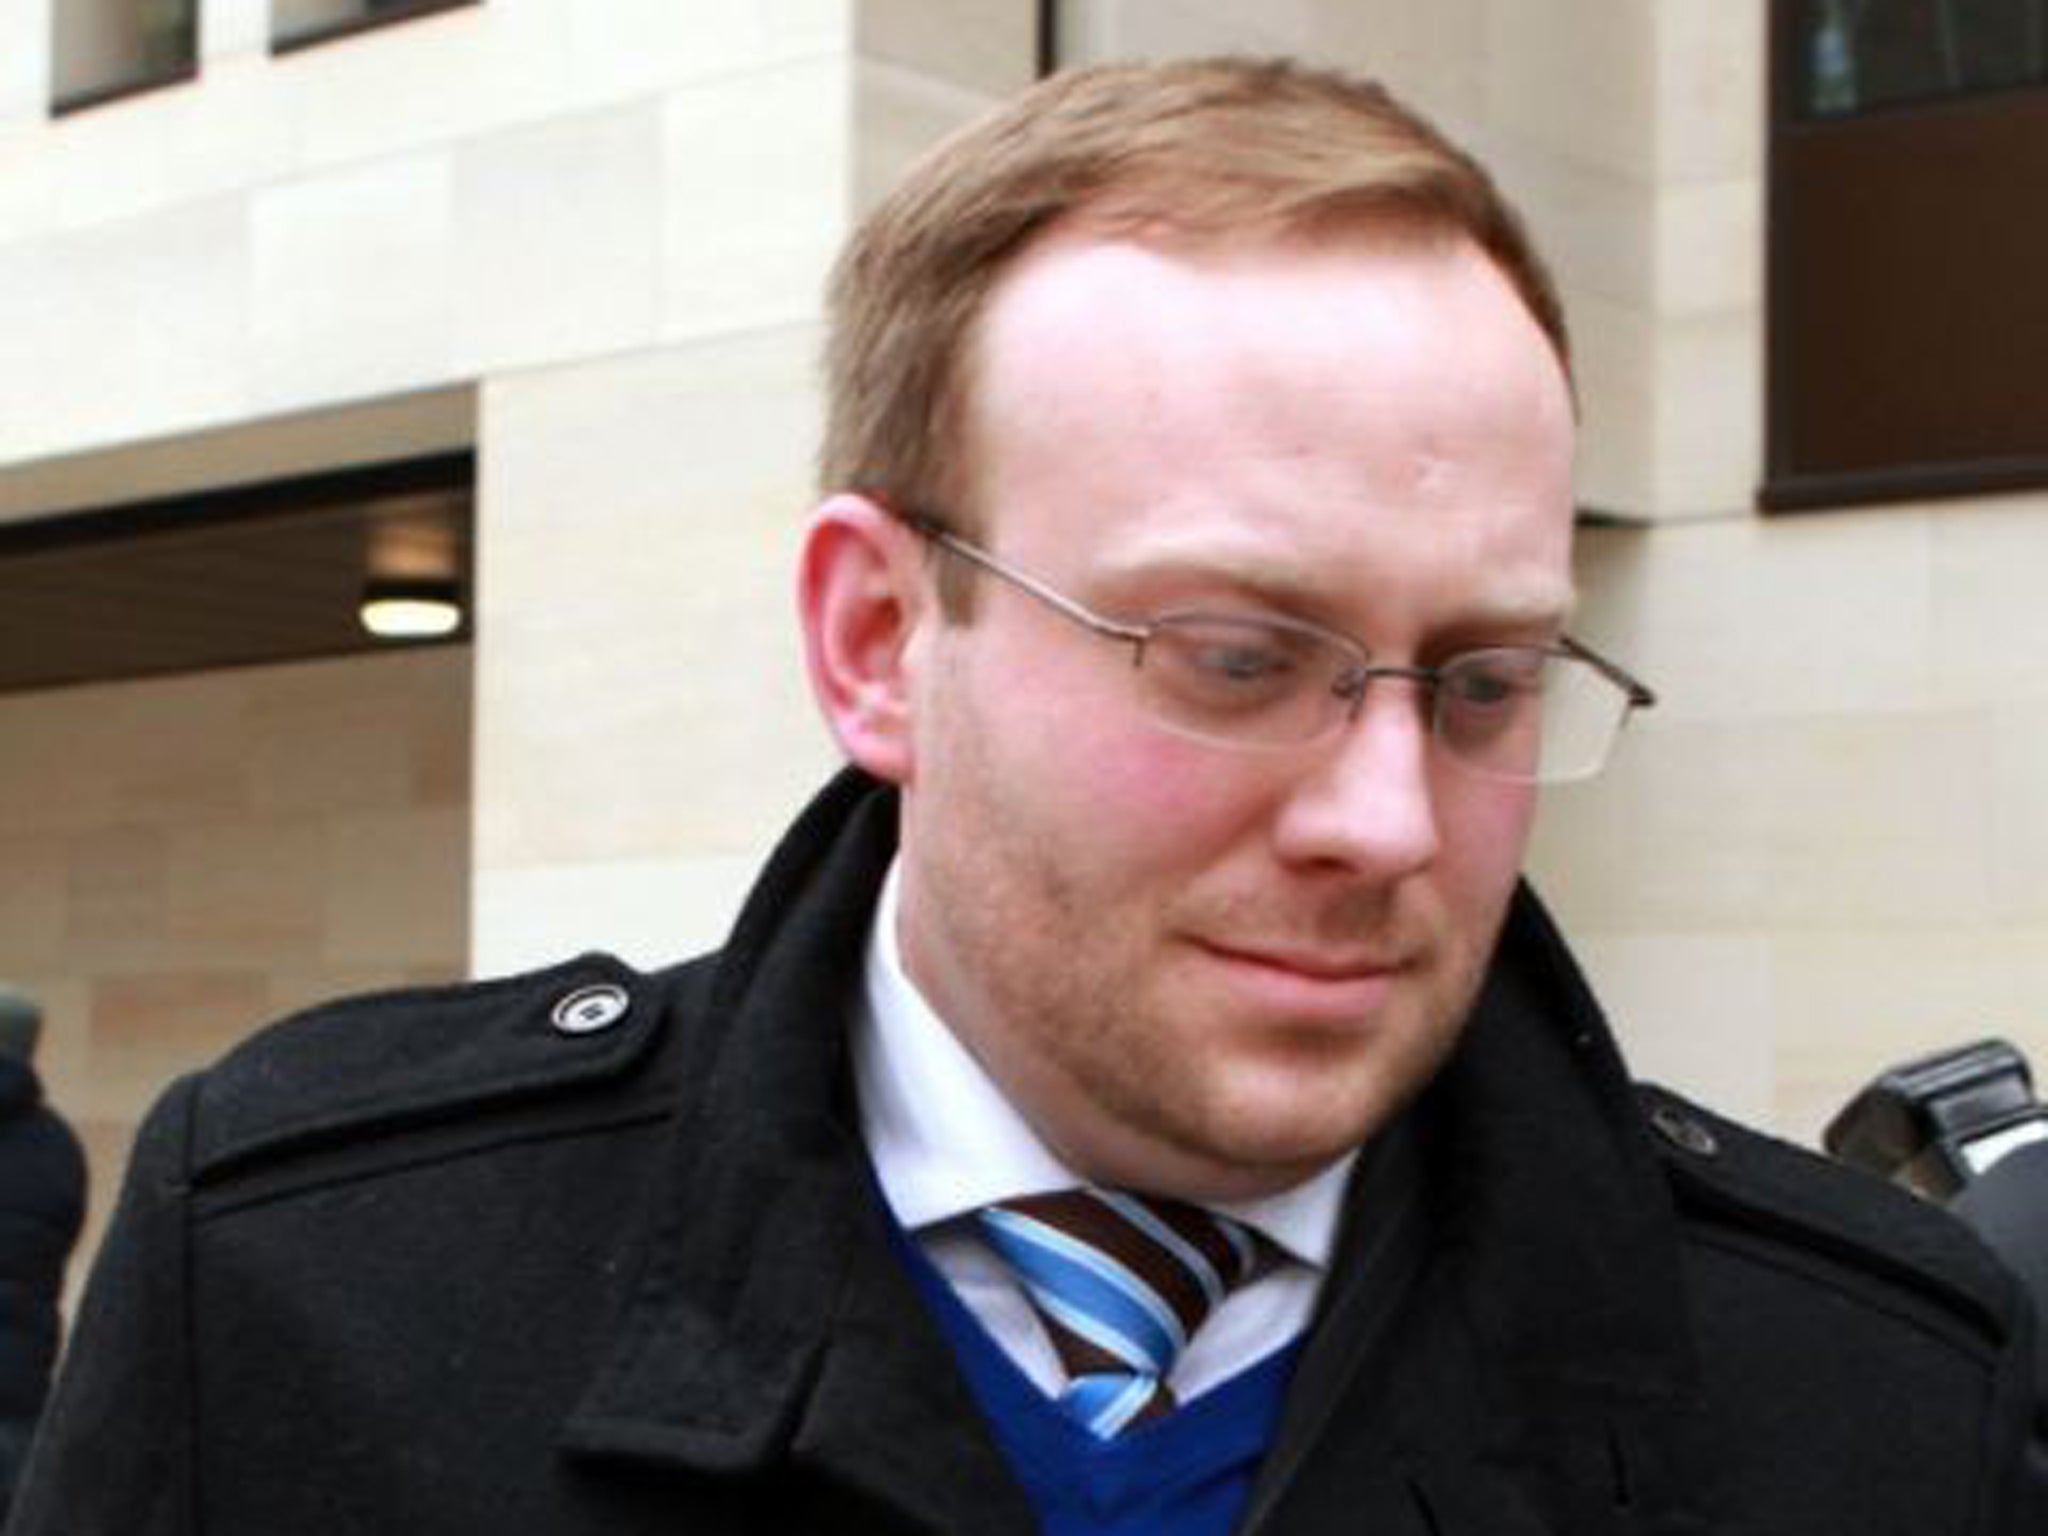 Former police sergeant James Bowes who is facing jail after admitting selling information to The Sun newspaper